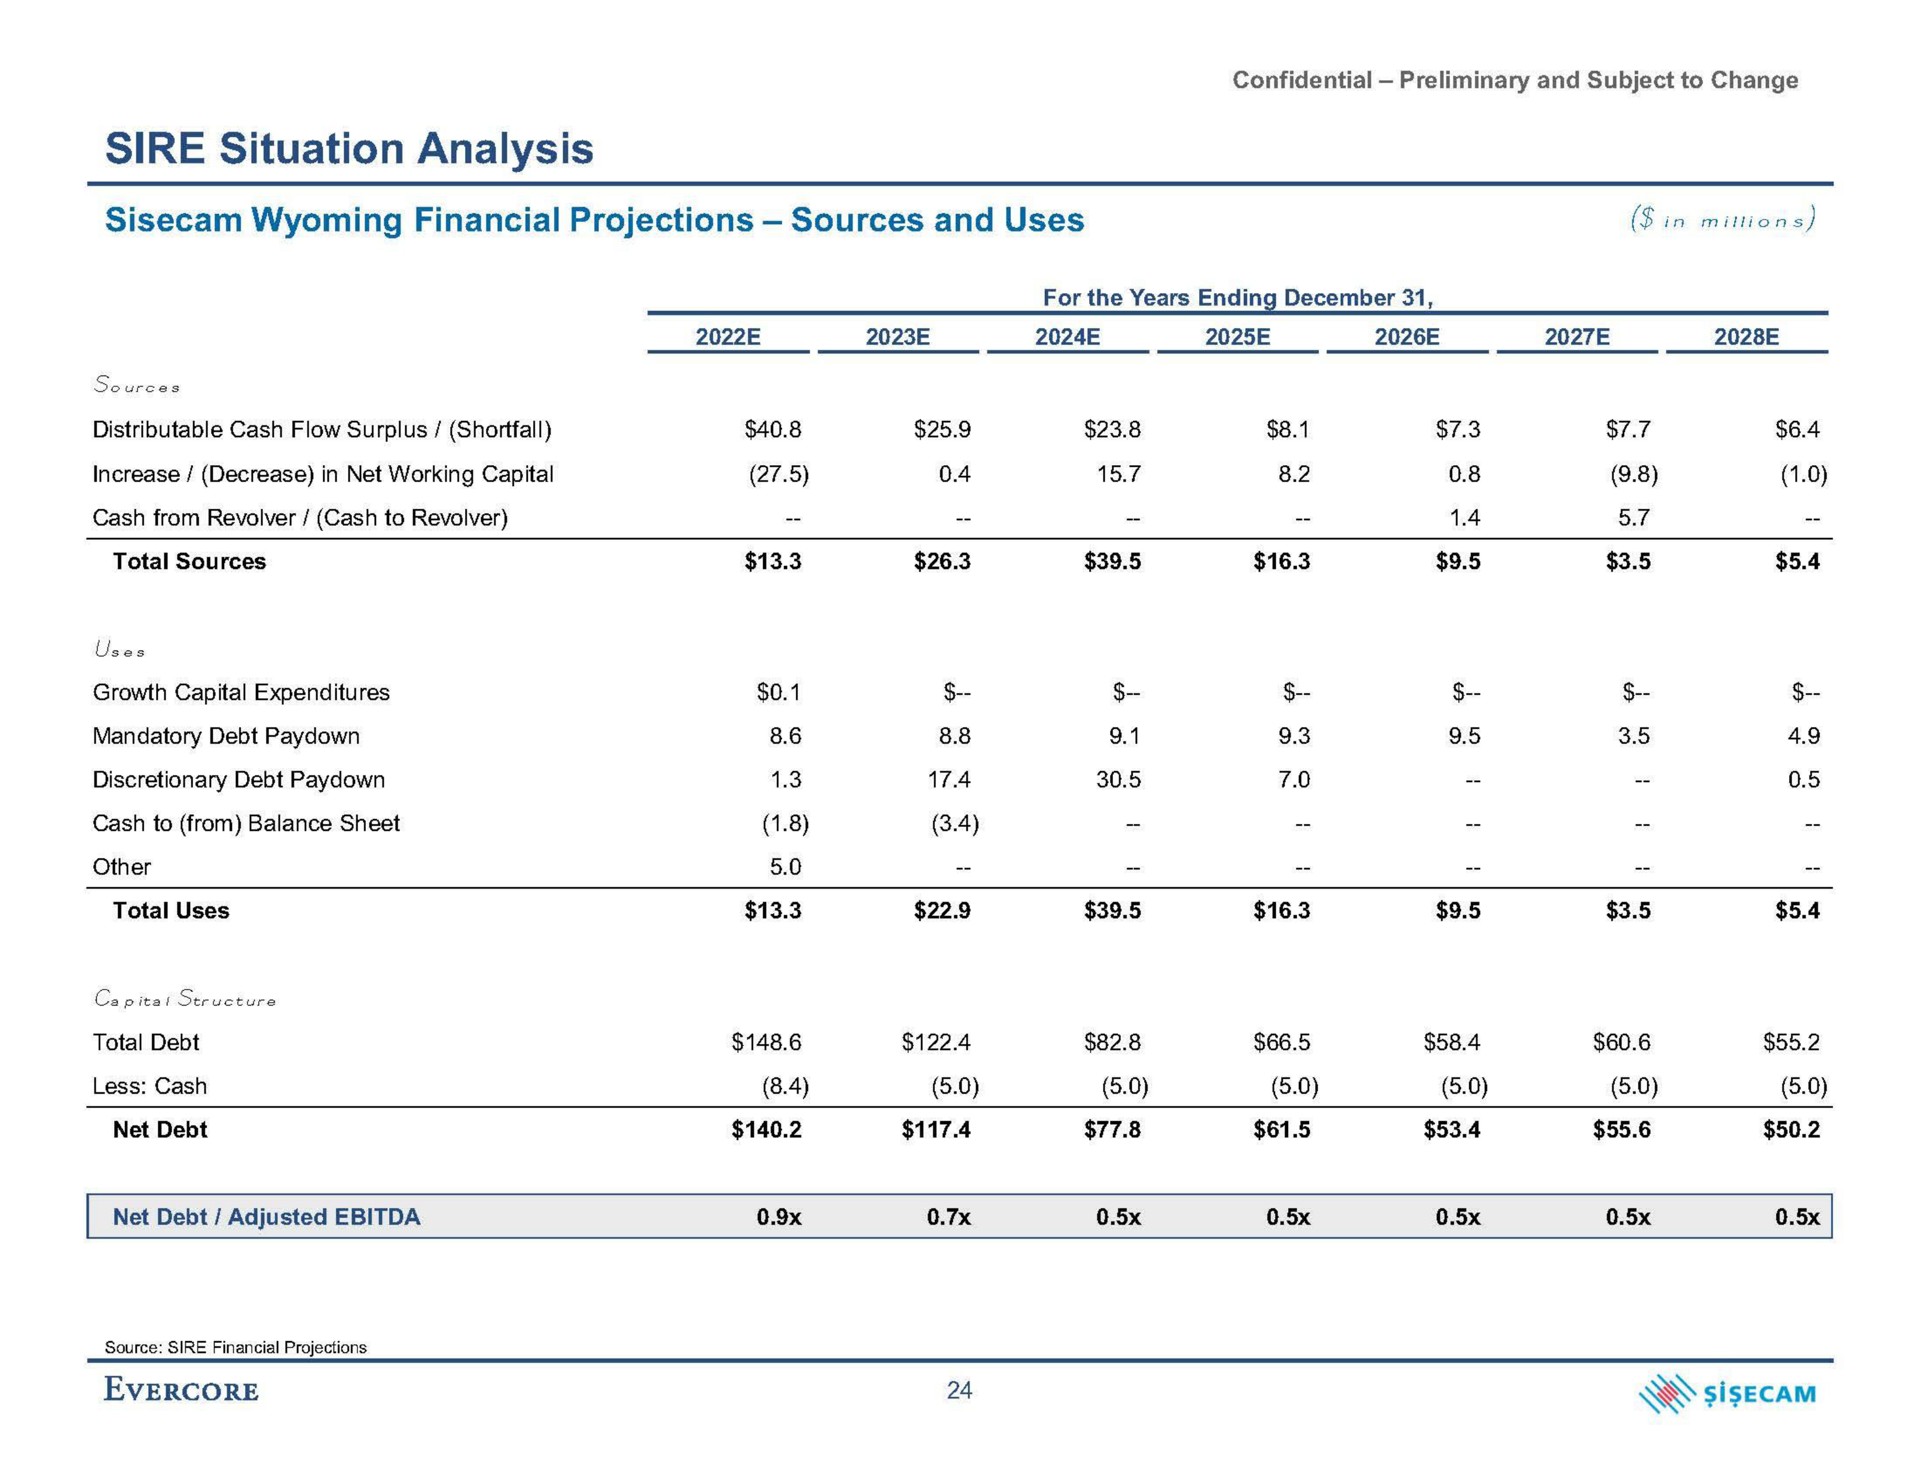 sire situation analysis financial projections sources and uses in | Evercore